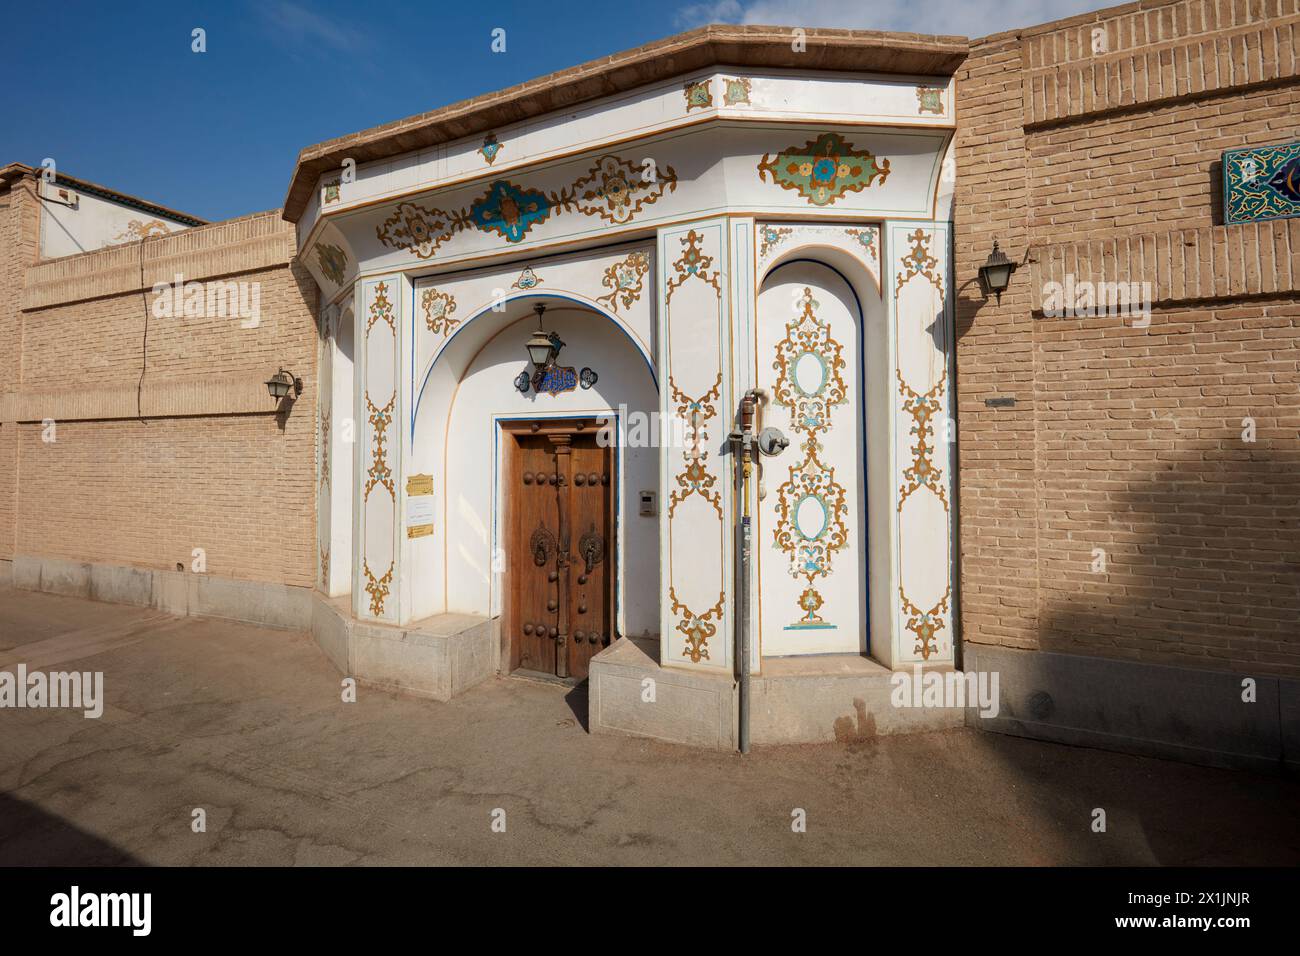 Ornate entrance gate with old wooden door of the Mollabashi Historical House in Isfahan, Iran. Stock Photo